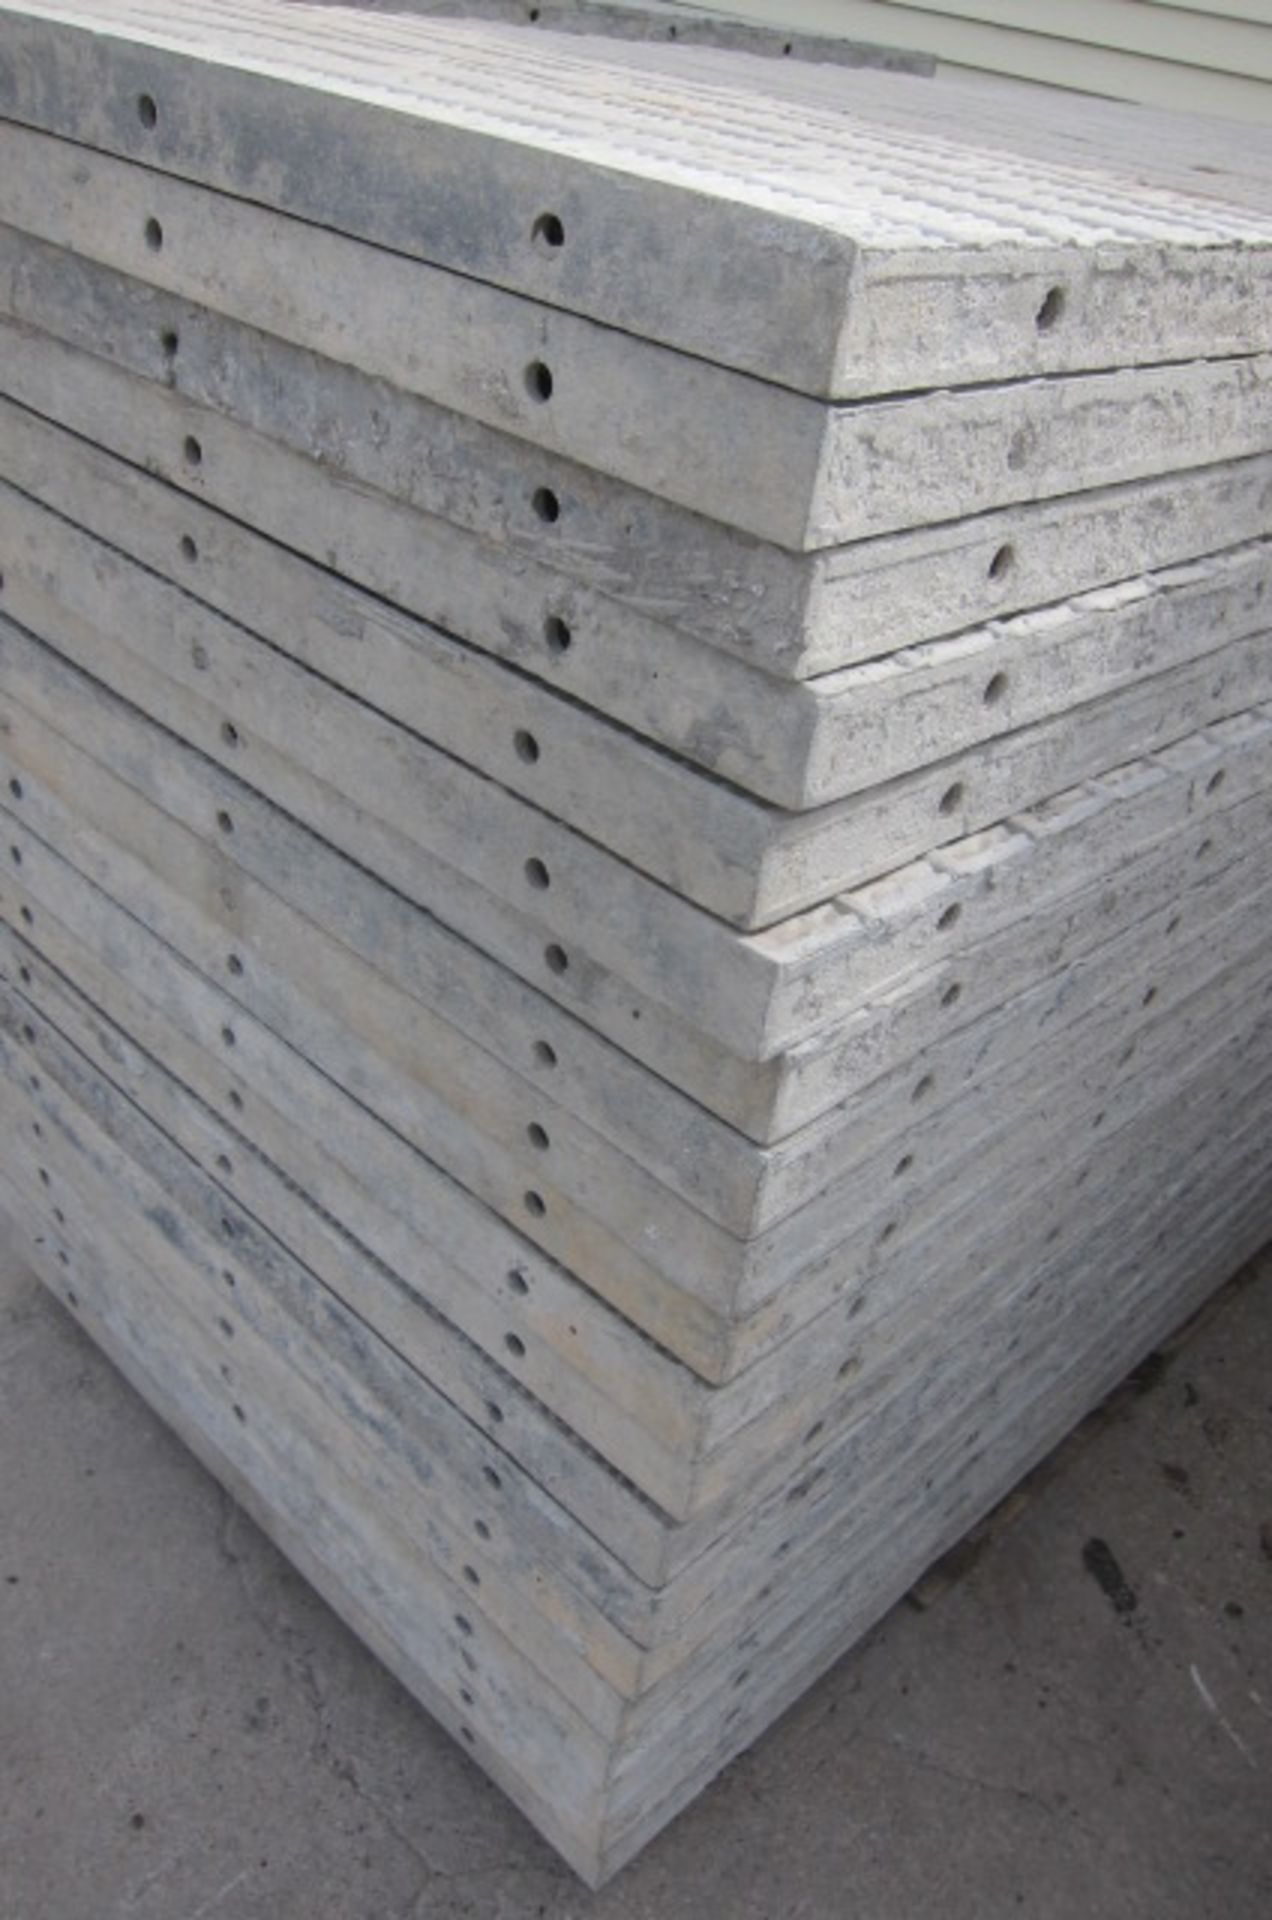 (20) 36" X 8' Wall-ties Aluminum Concrete Forms, VertiBrick, 6-12 Hole Pattern, Nice Clean Set, - Image 3 of 4